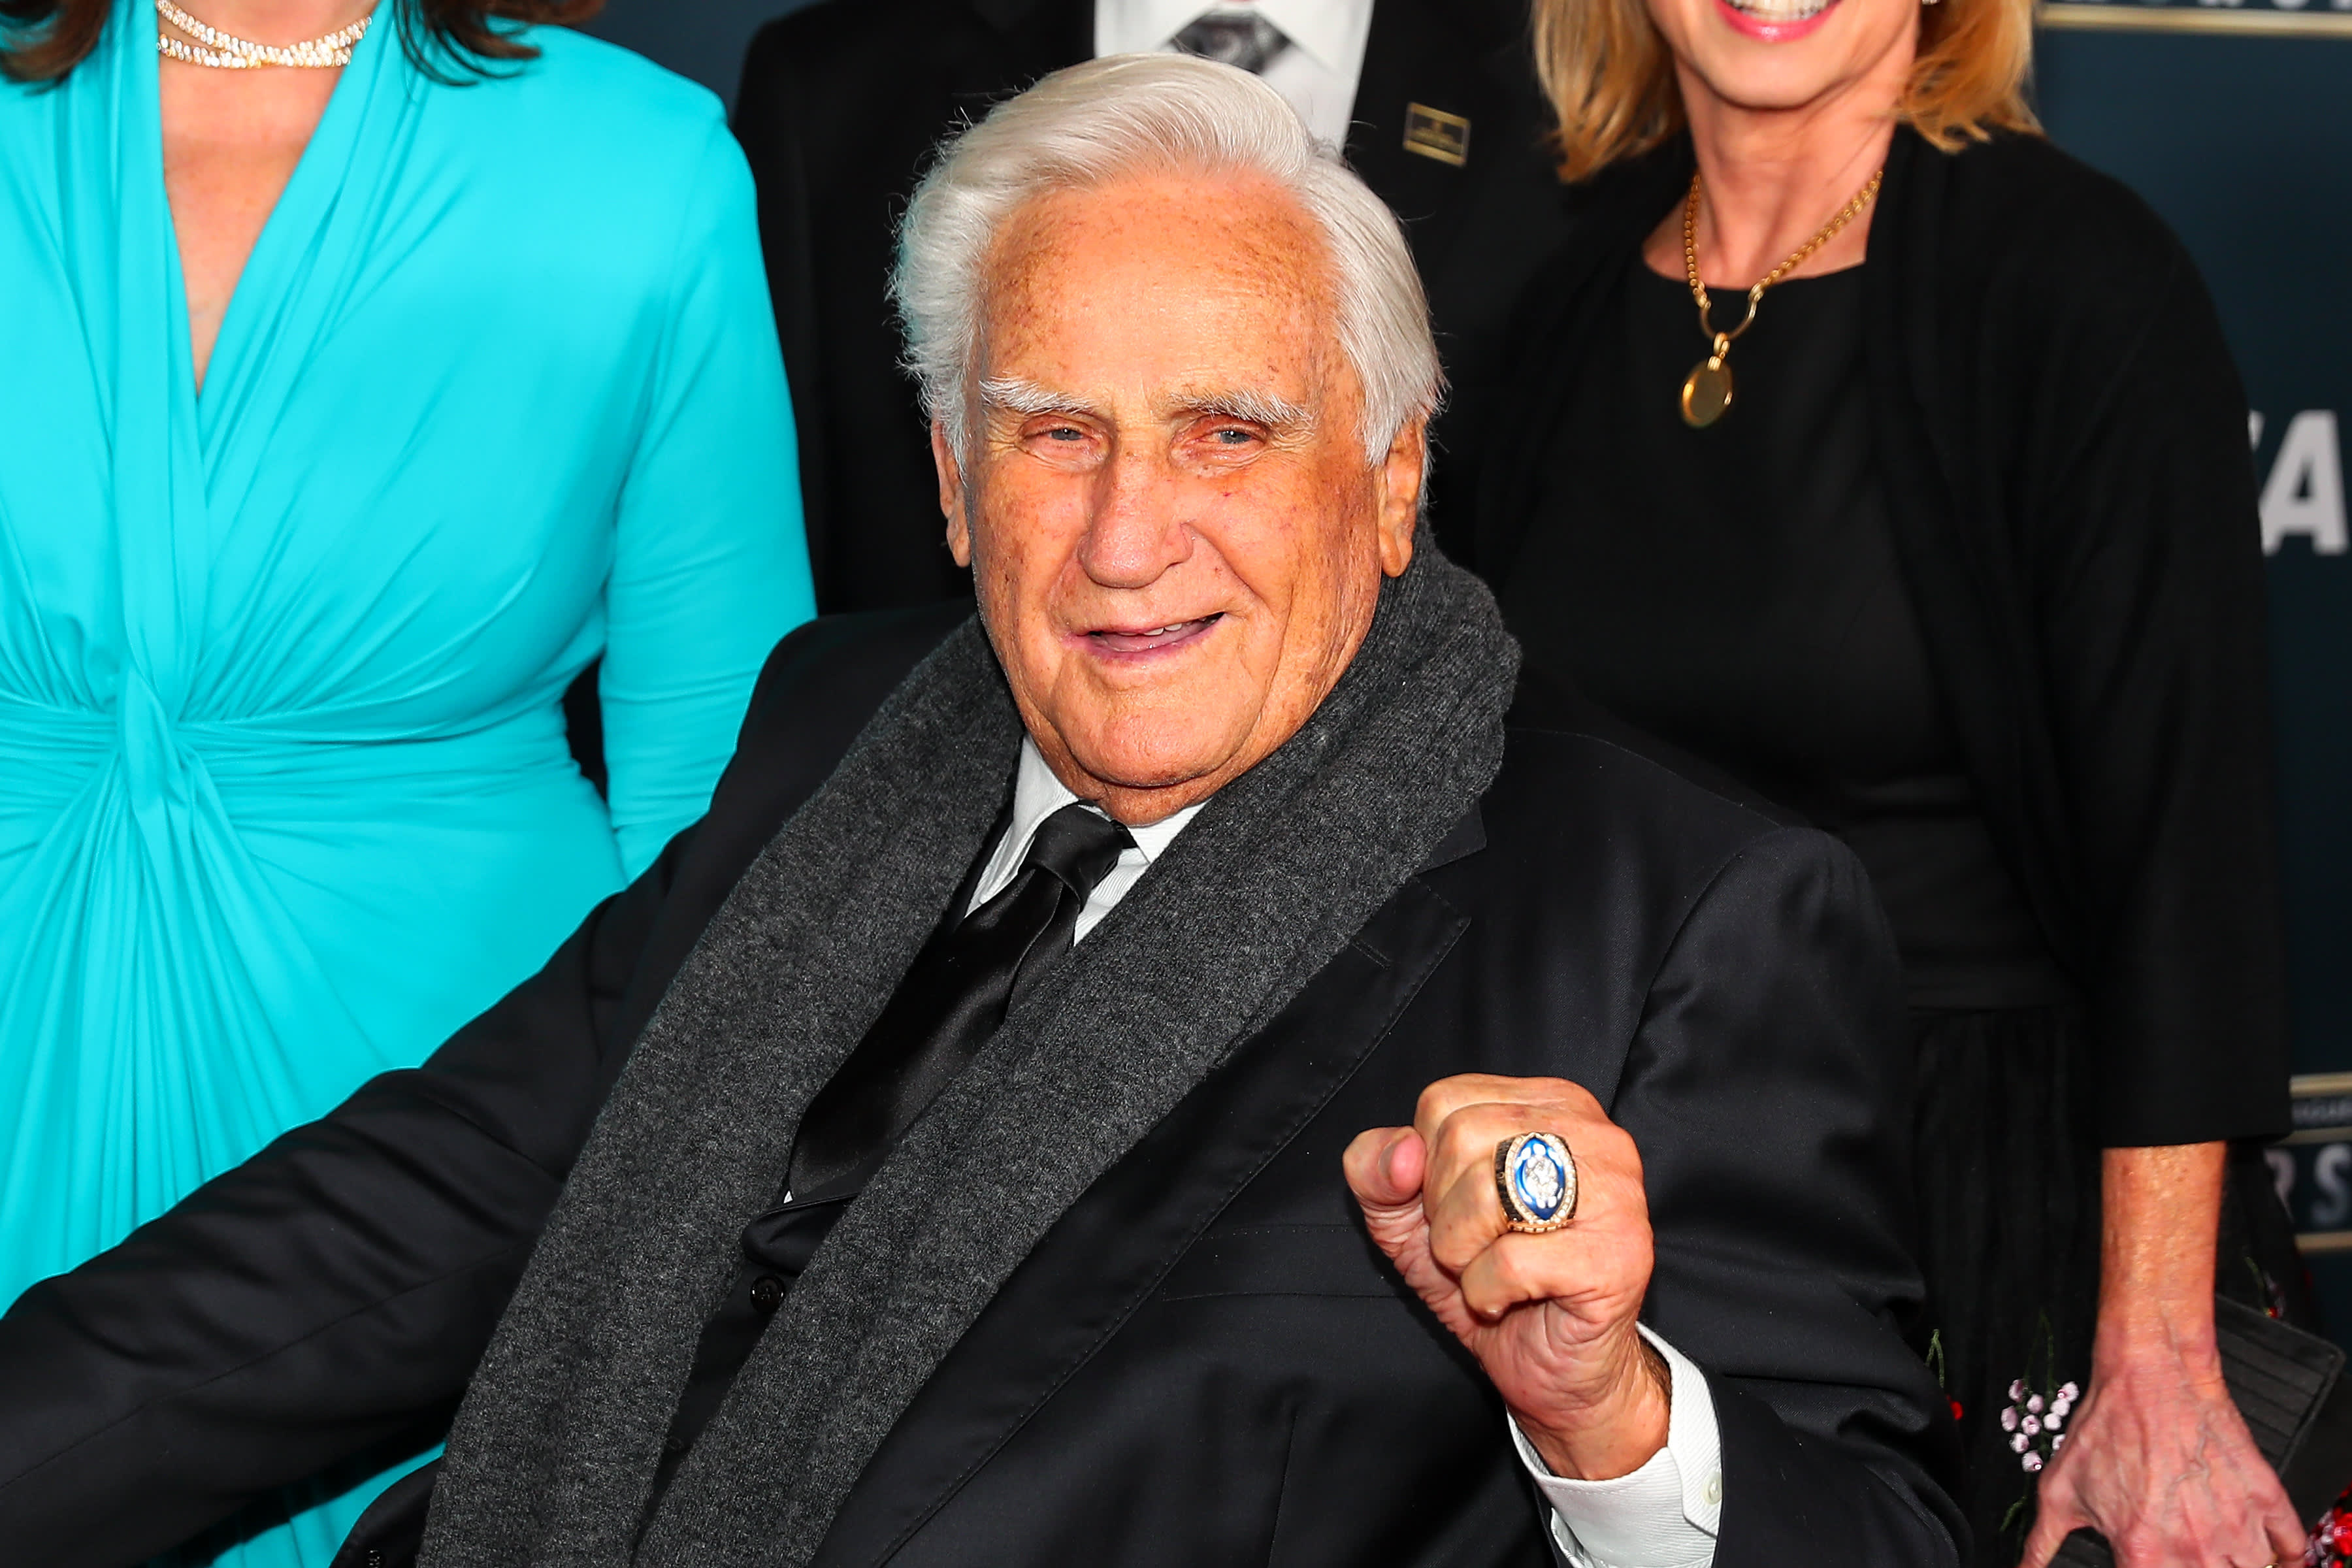 Don Shula, winningest coach in NFL history, dies at 90